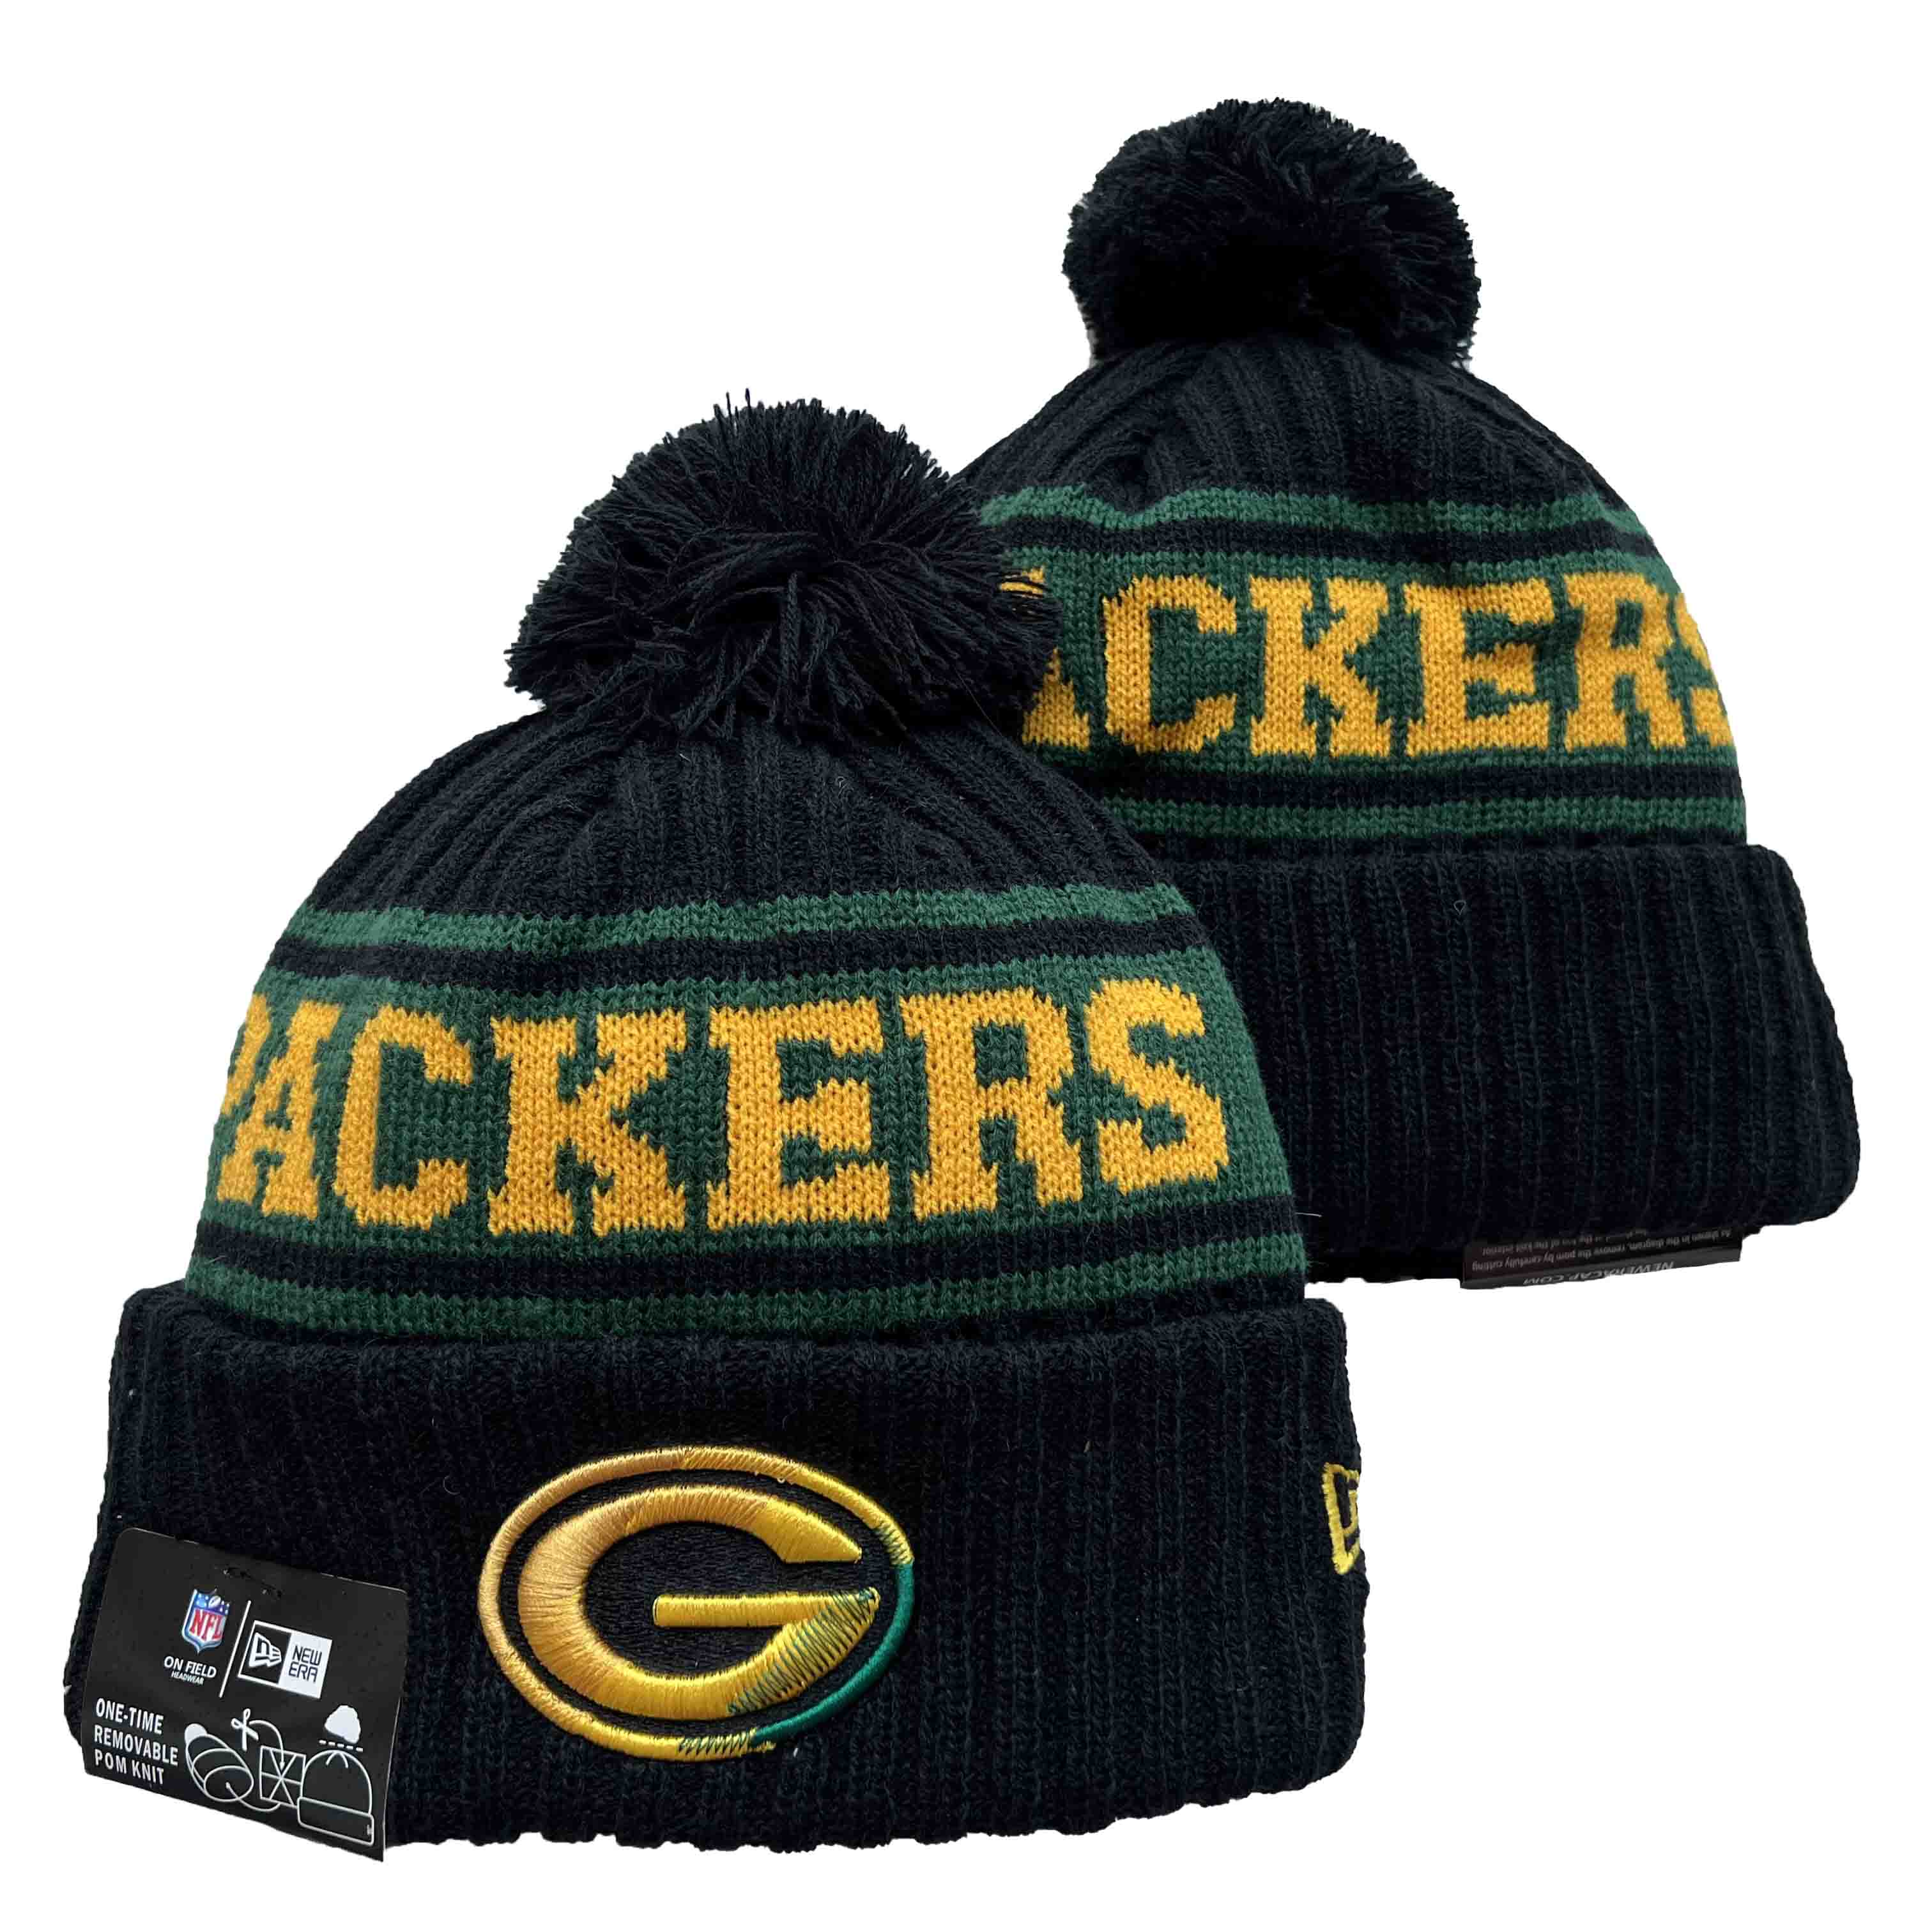 NFL Green Bay Packers Beanies Knit Hats-YD1184